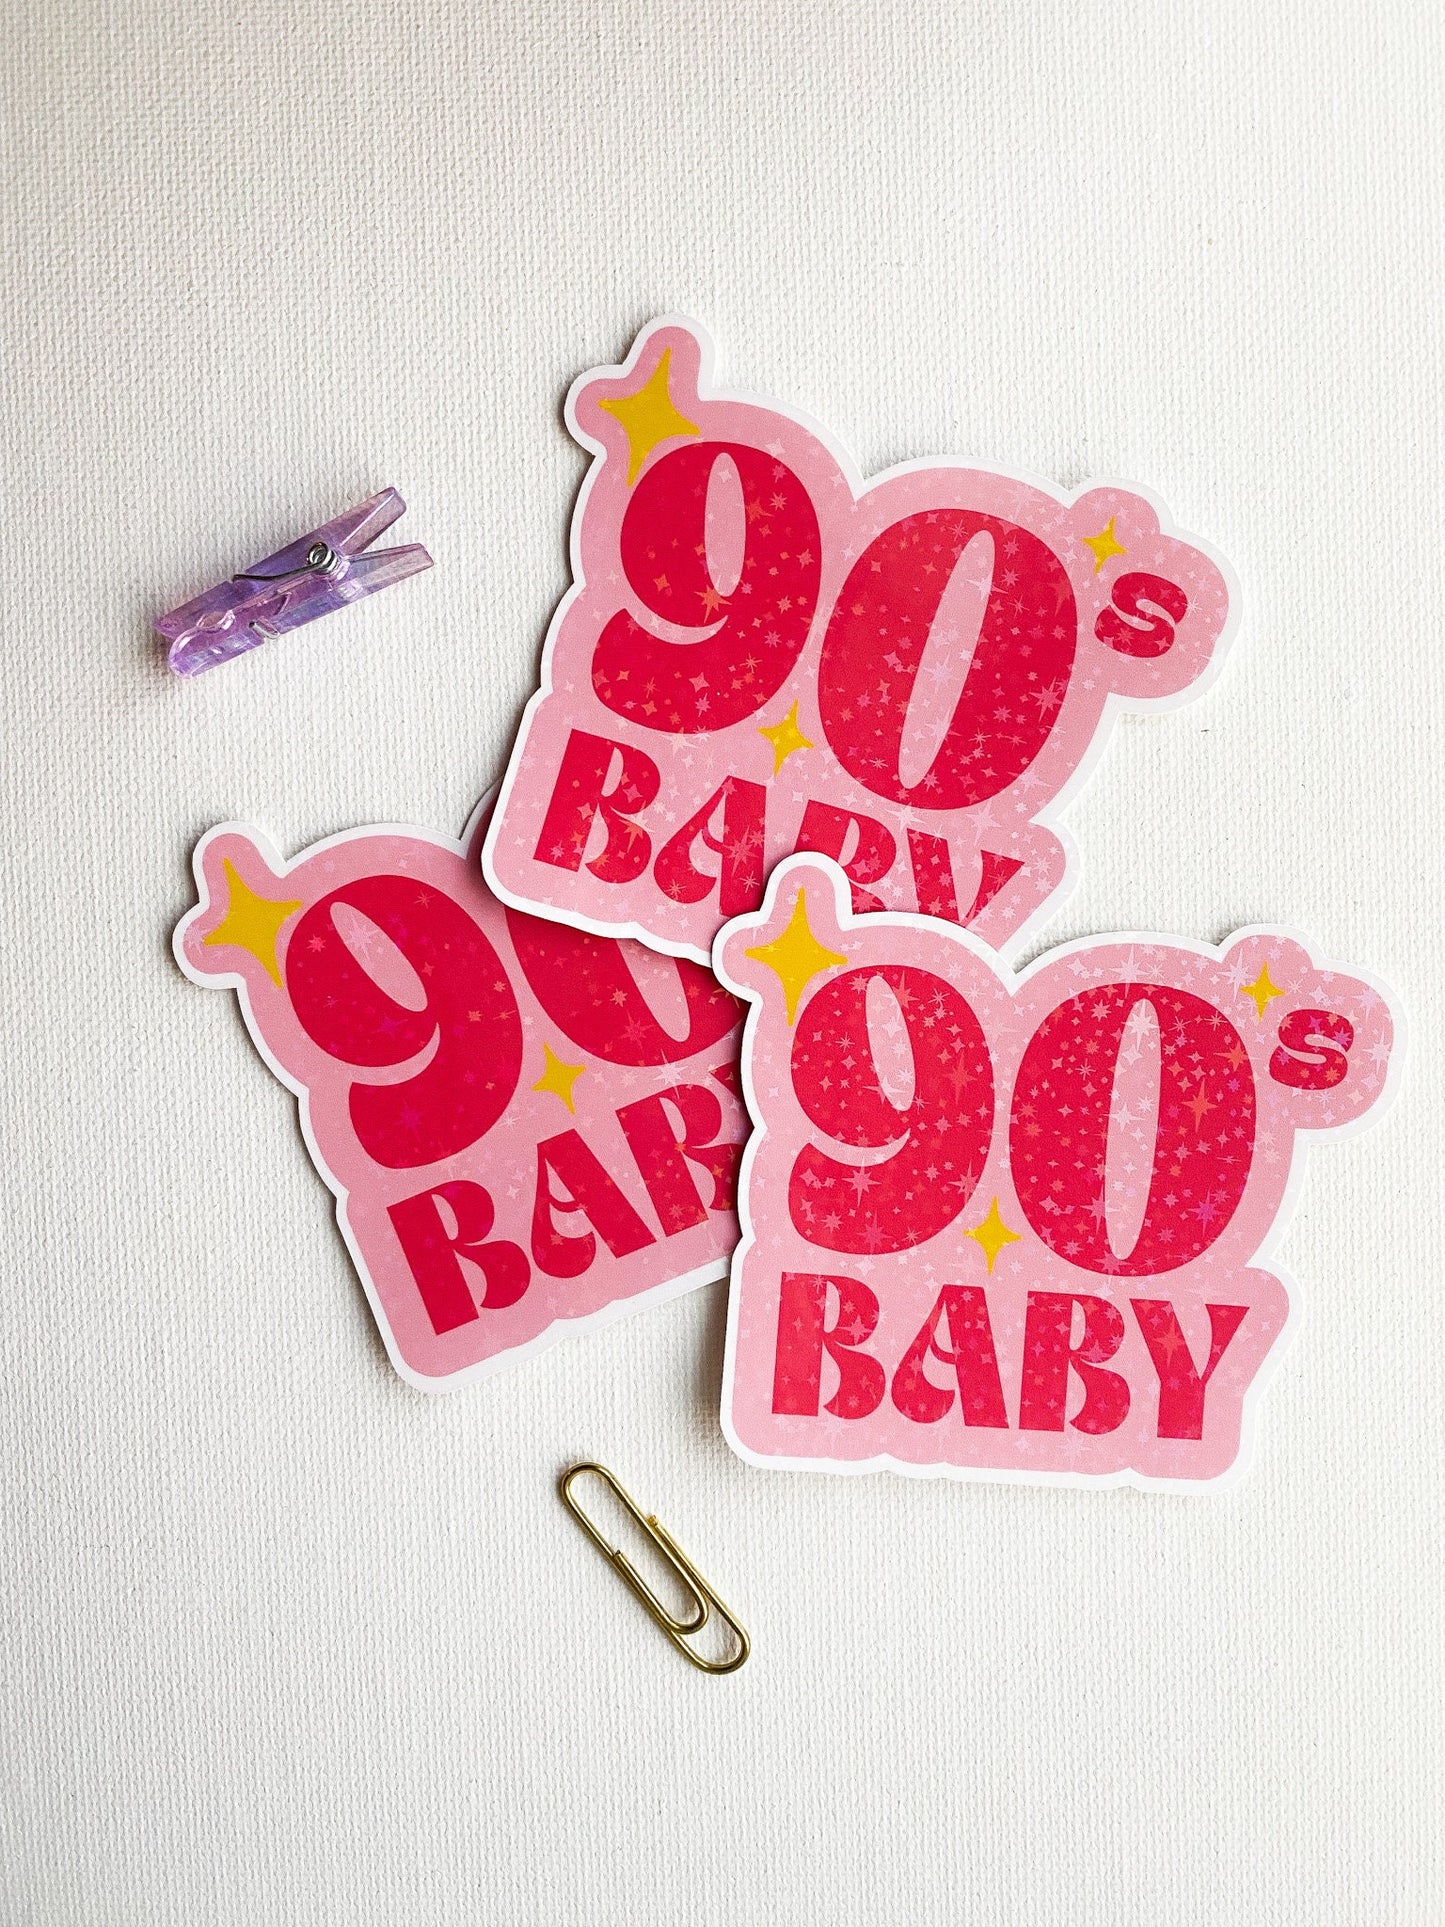 Baby Aesthetic Pink Red Retro Word Pin up 70s 80s' Sticker